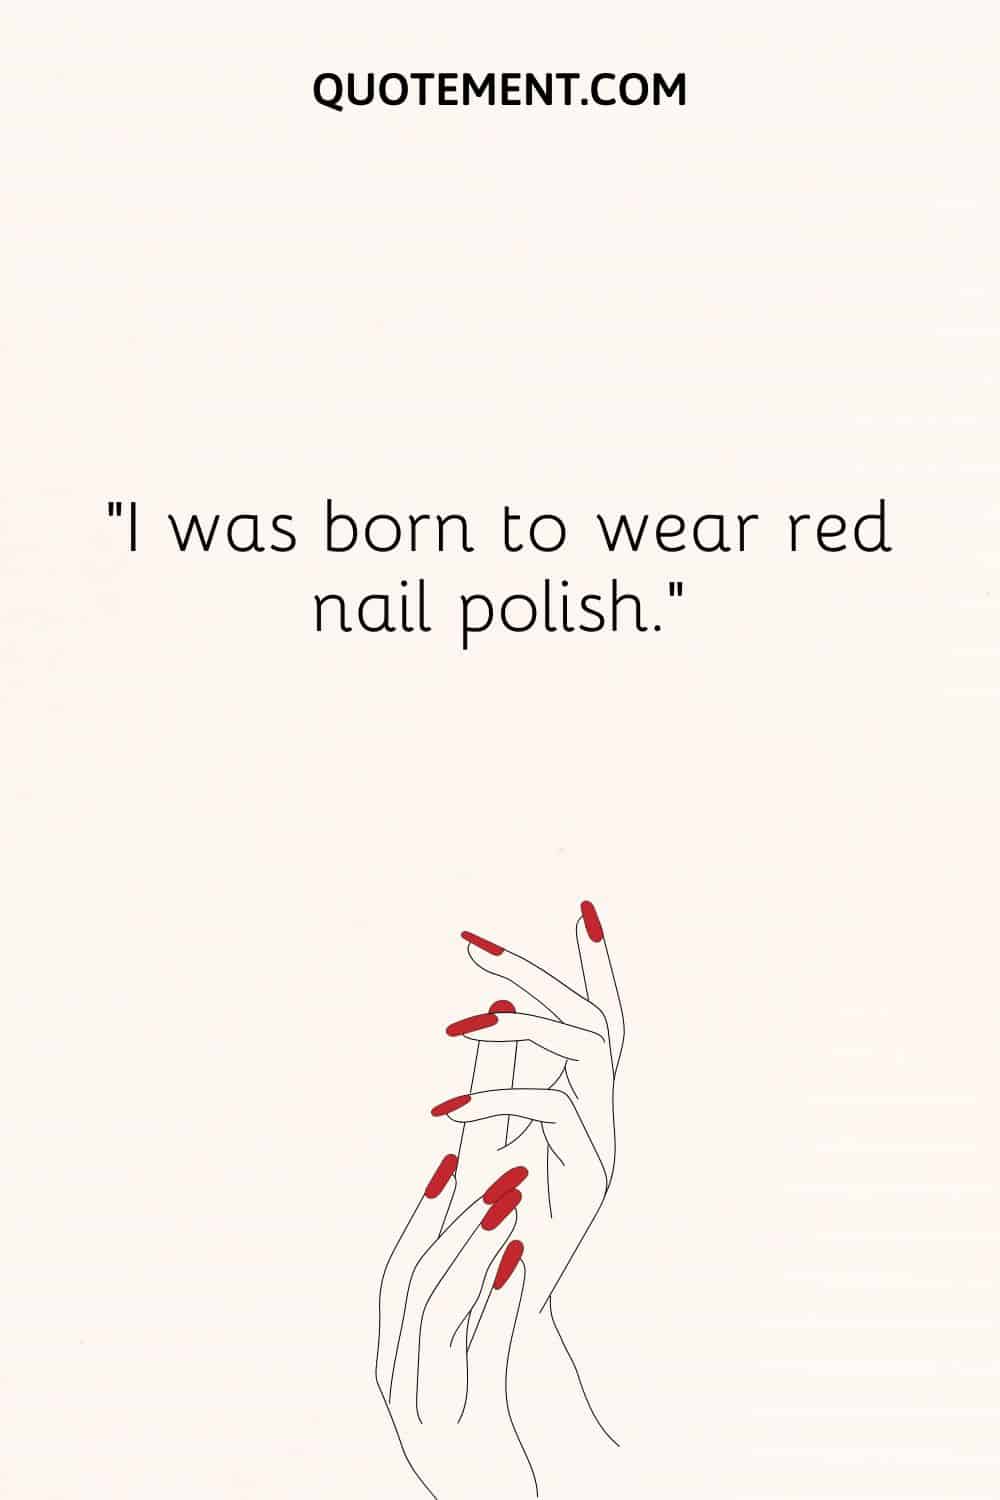 I was born to wear red nail polish.